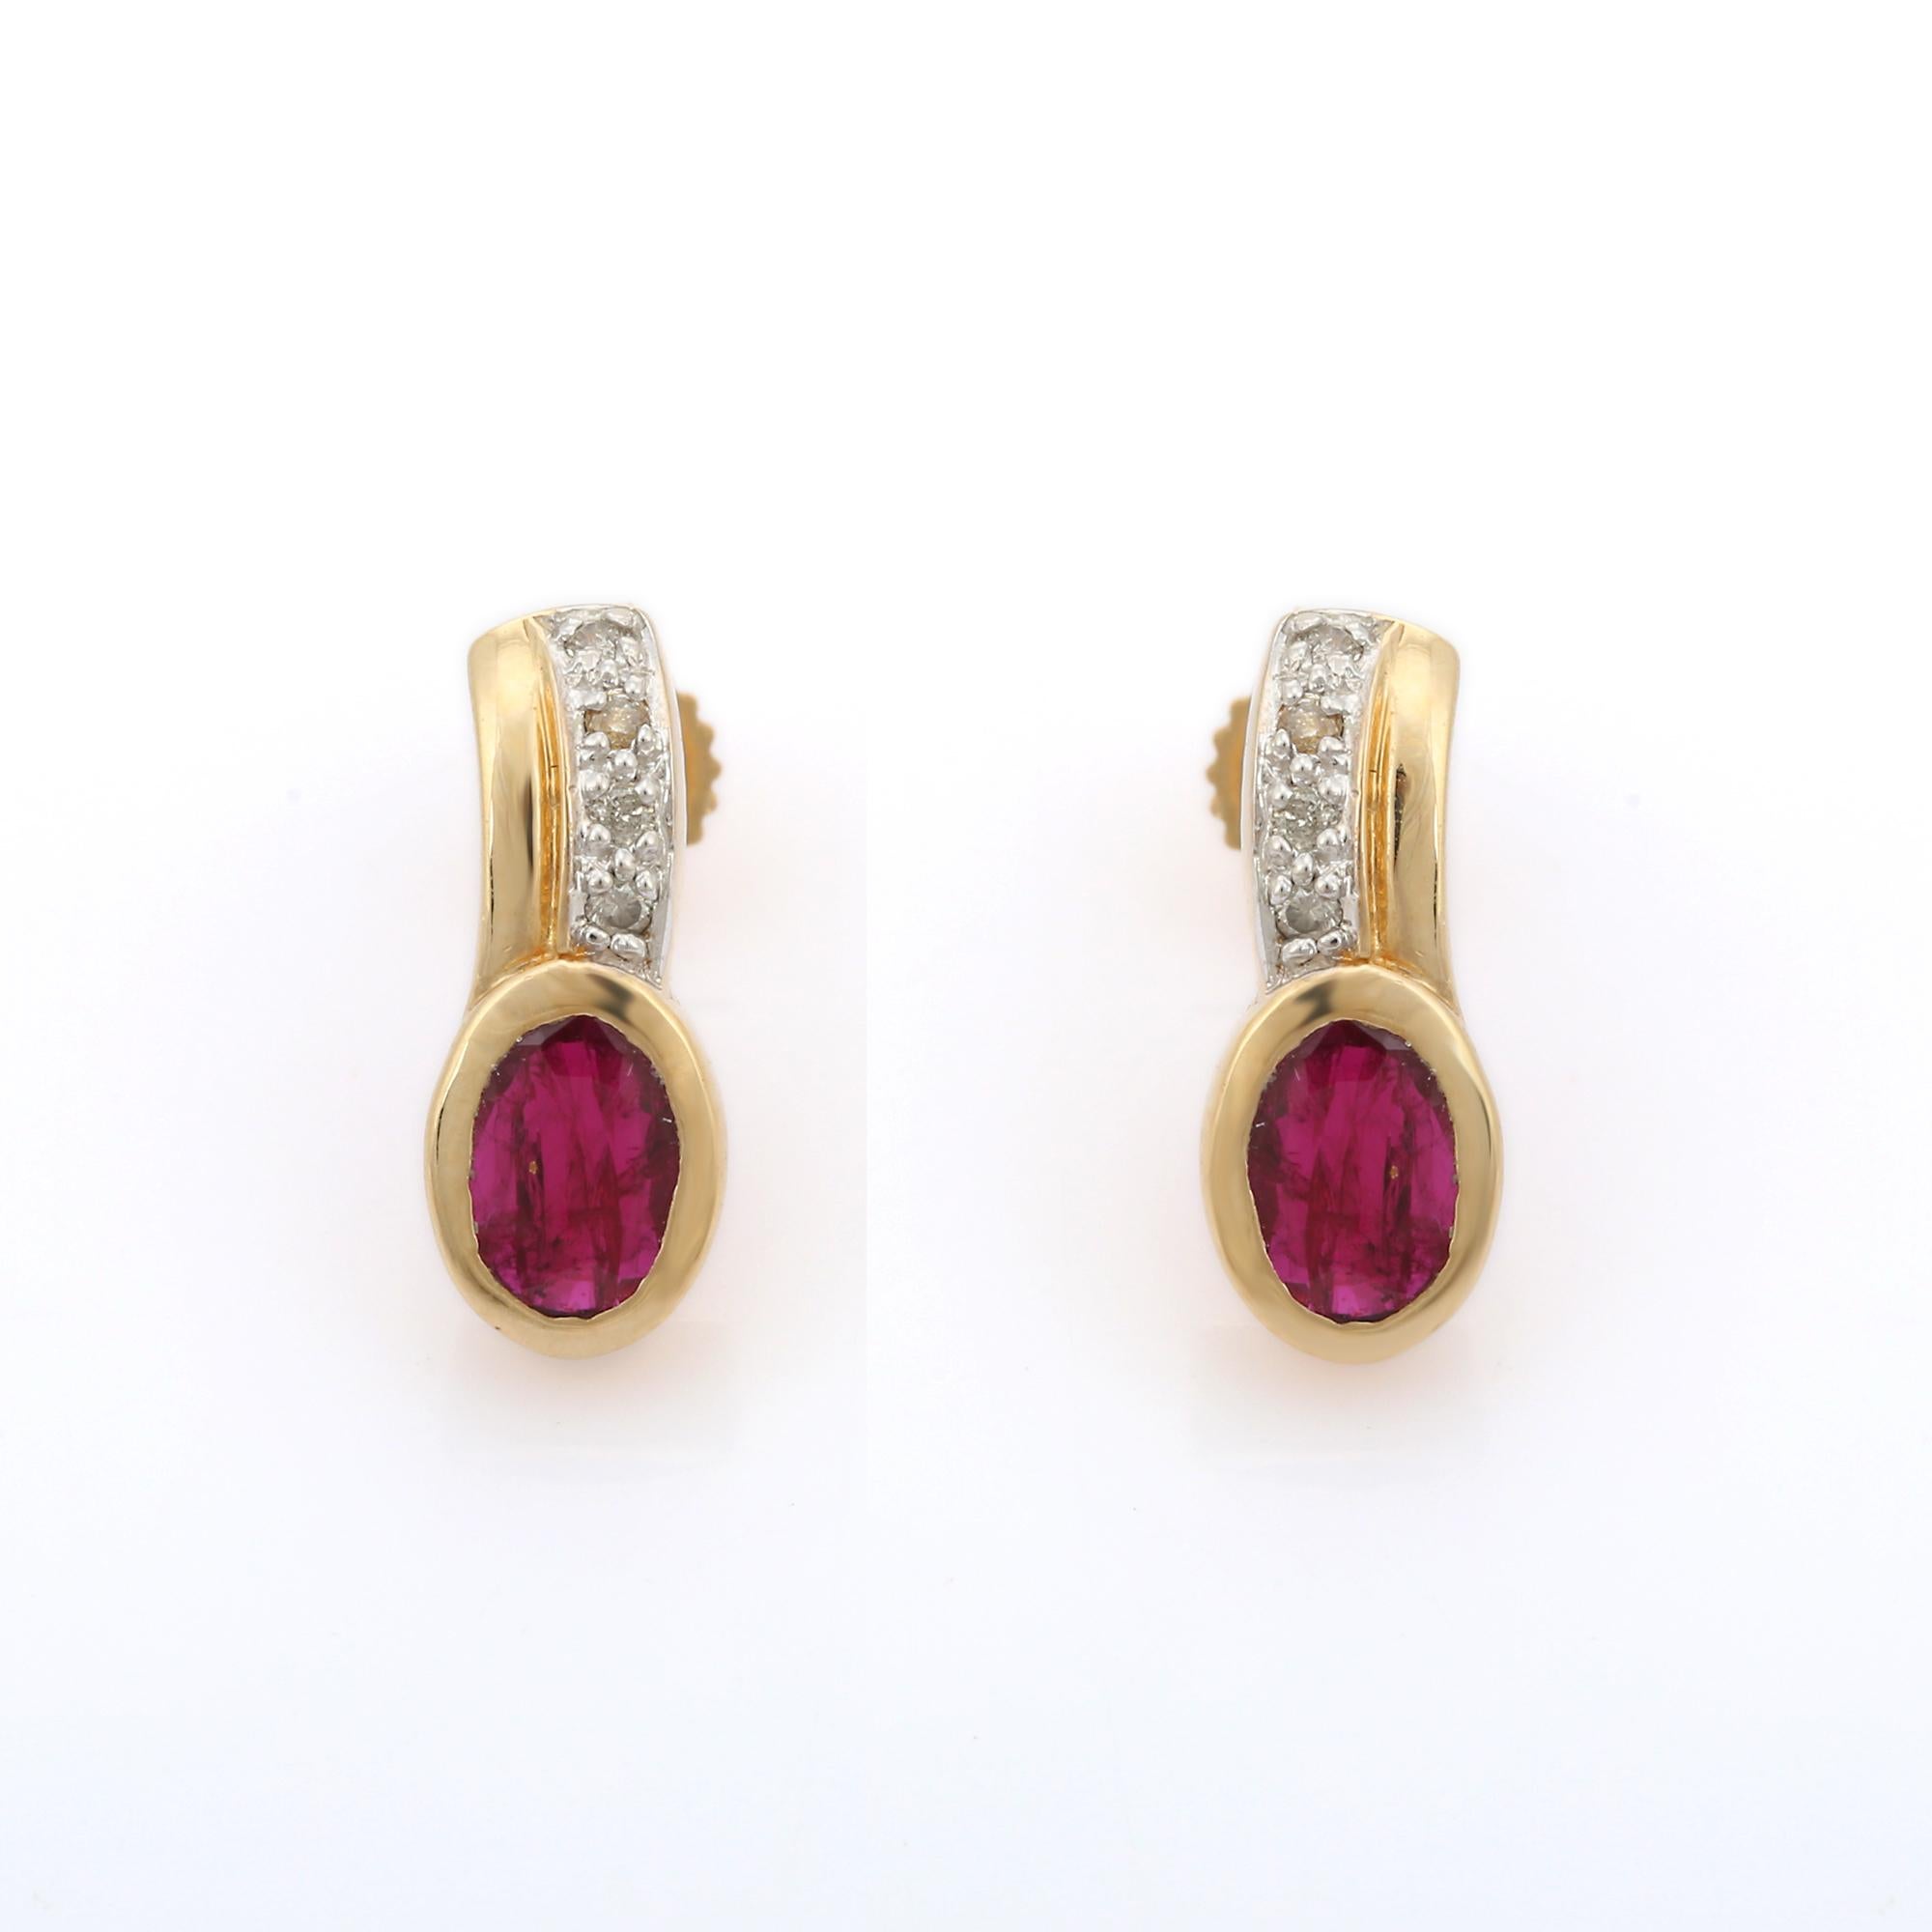 Natural Oval Ruby Diamond Handmade Stud Earrings For Women in 14K Yellow Gold In New Condition For Sale In Houston, TX